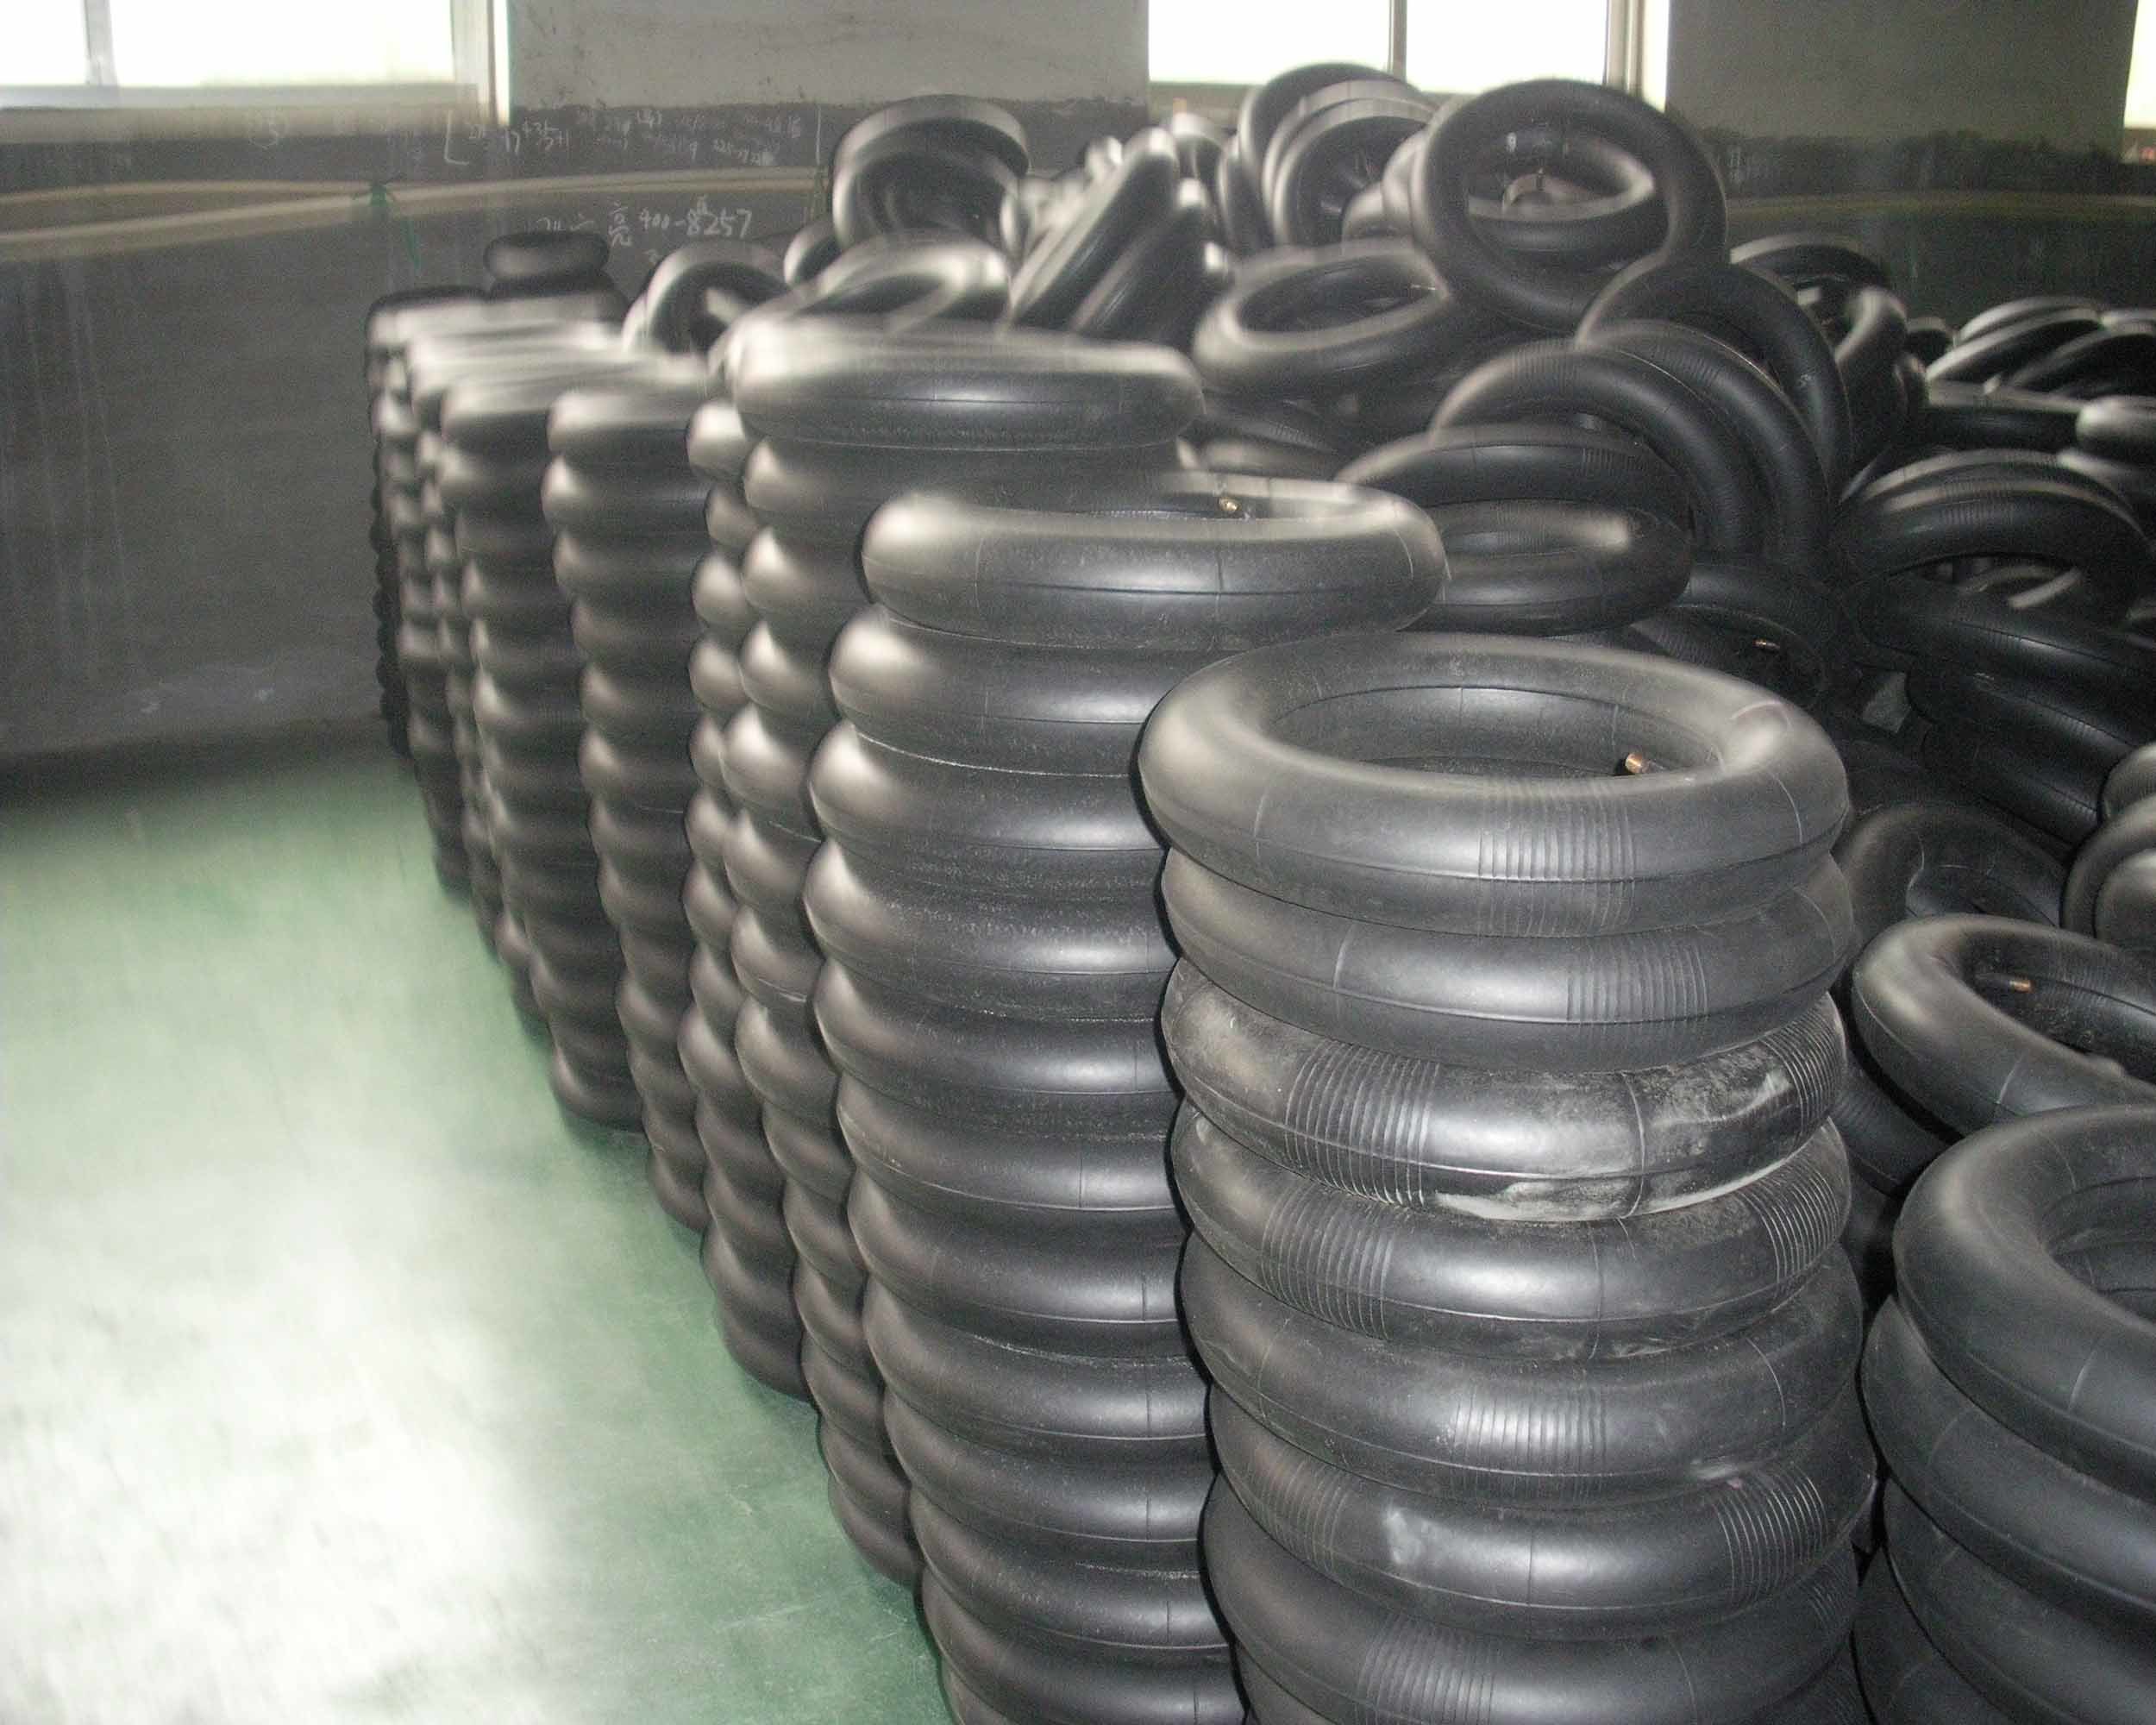 Factory Rubber and Butyl Agricultural Inner Tube7.50-16